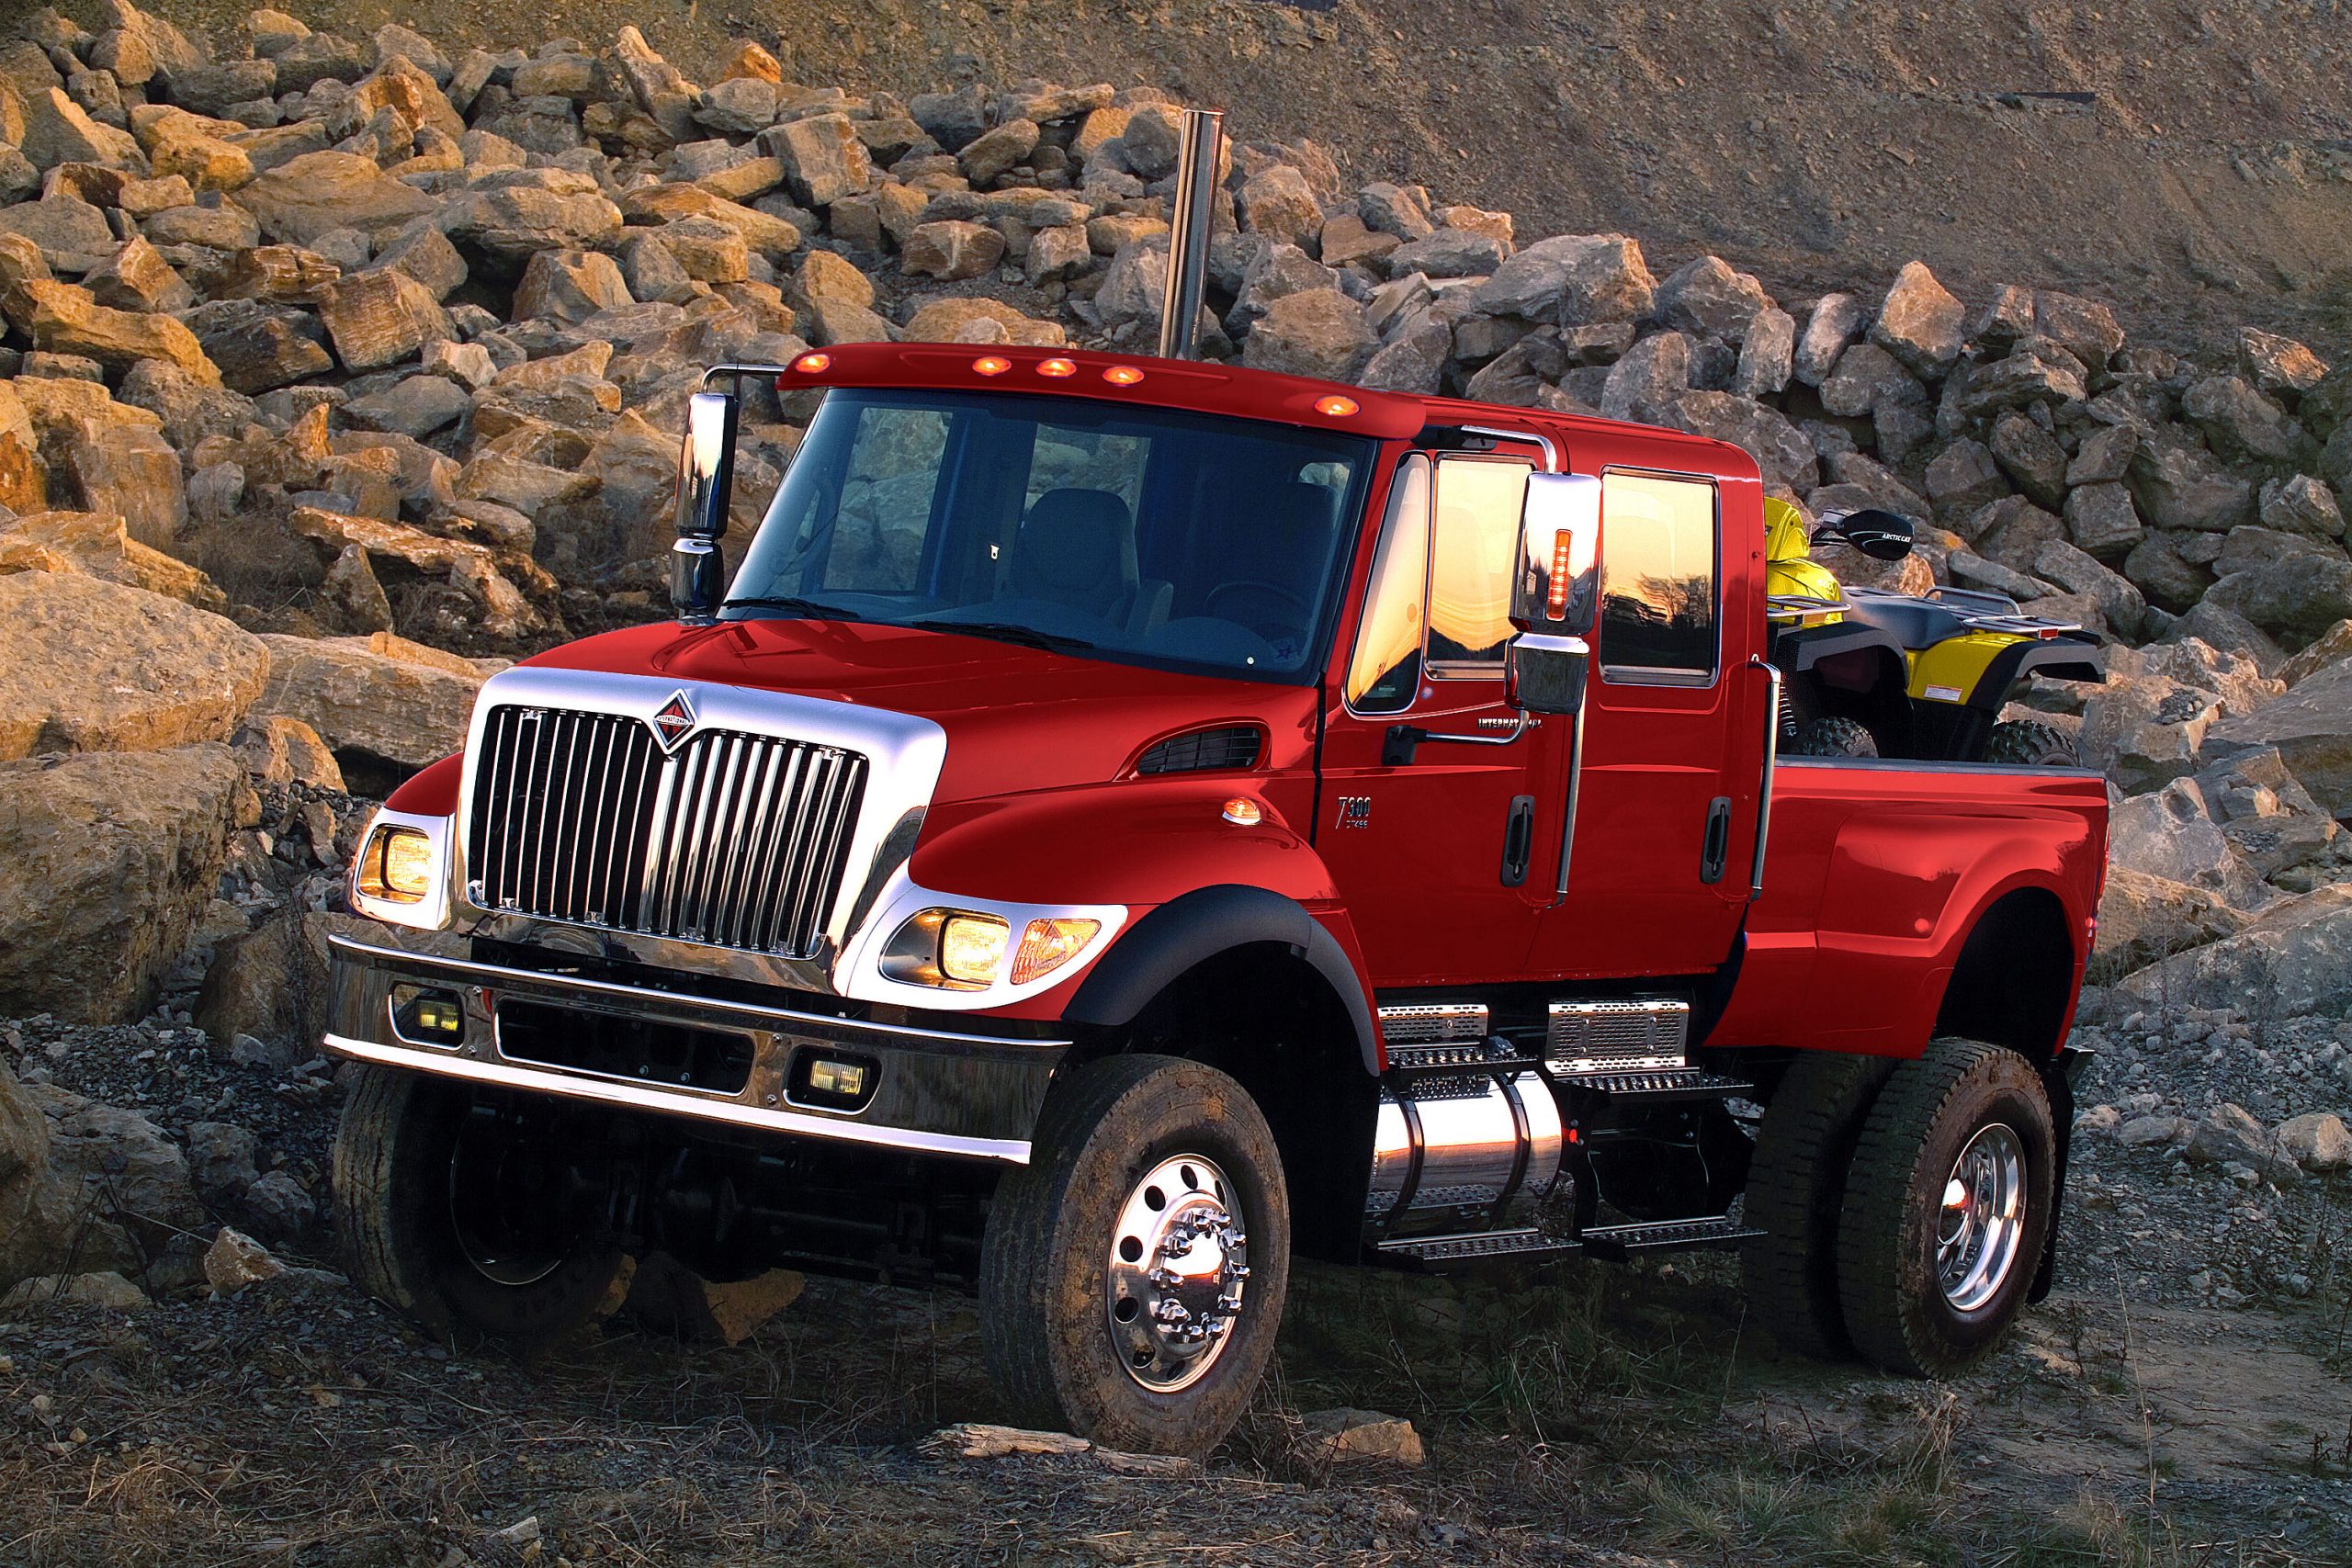 The international CXT is one of the biggest pickup trucks ever made and this one is parked on the side of a mountain and painted red